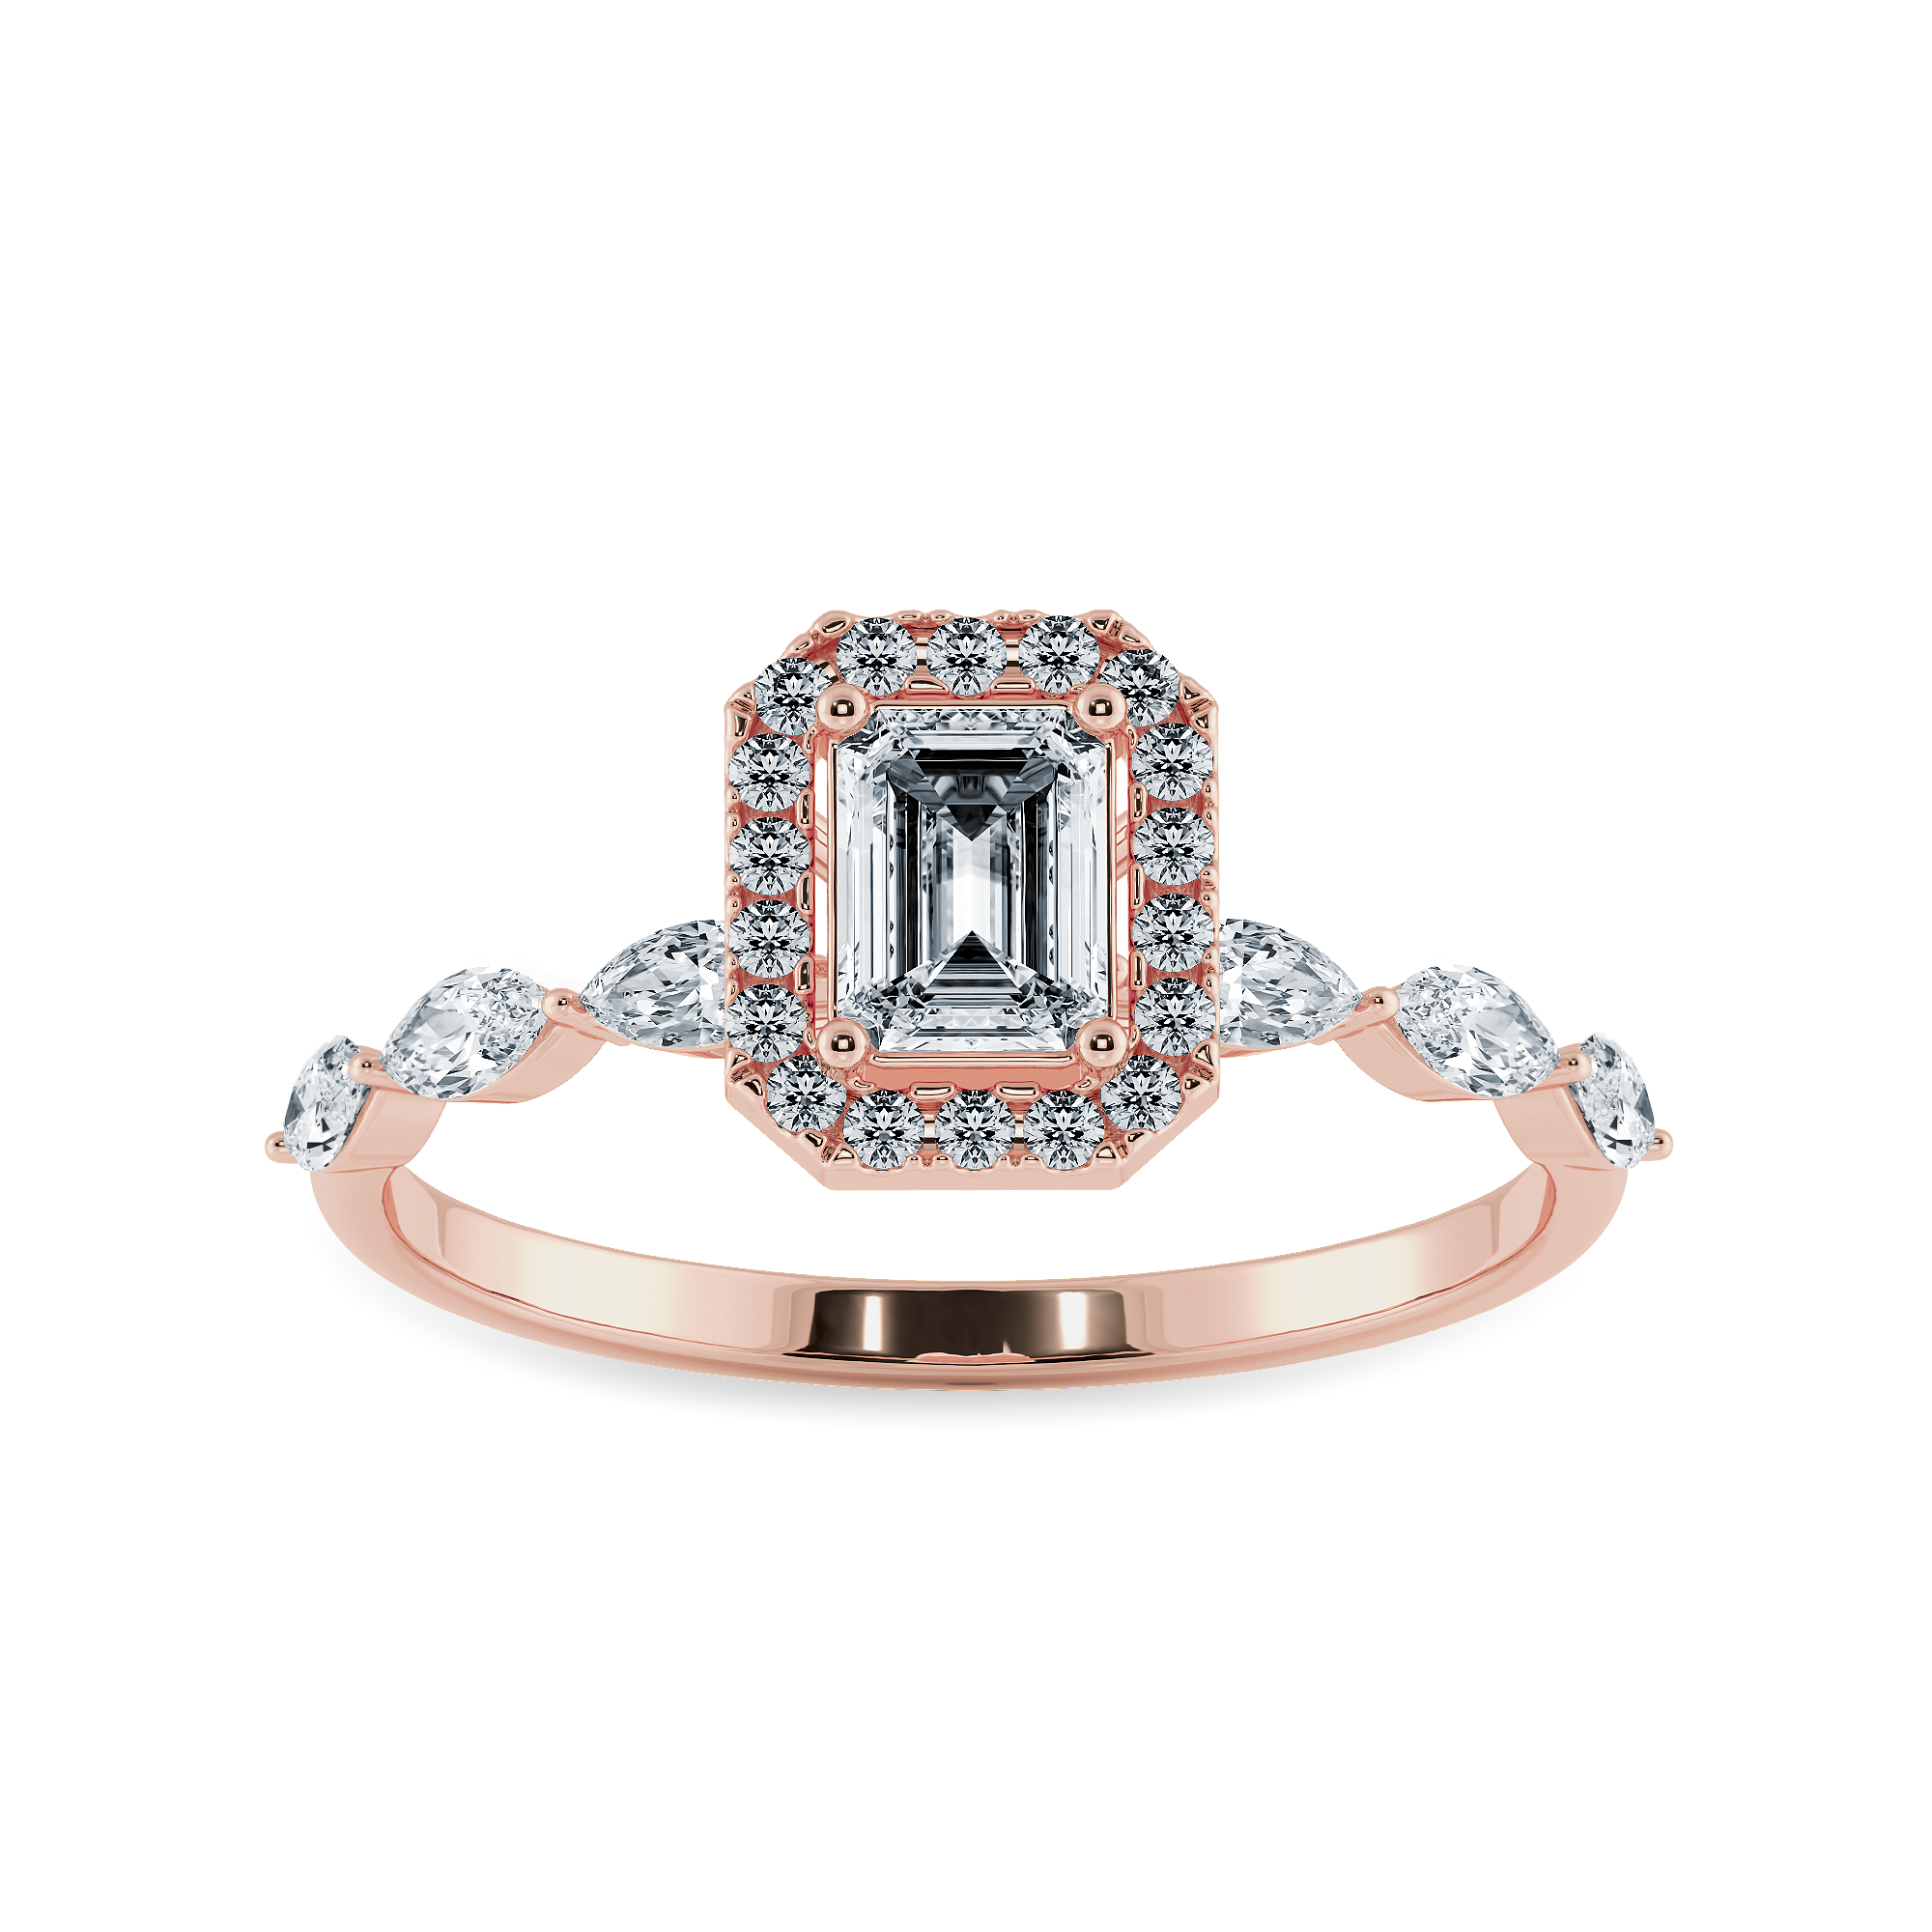 70-Pointer Emerald Cut Solitaire Halo Diamonds & Marquise Diamonds Accents 18K Rose Gold Solitaire Ring JL AU 1272R-B